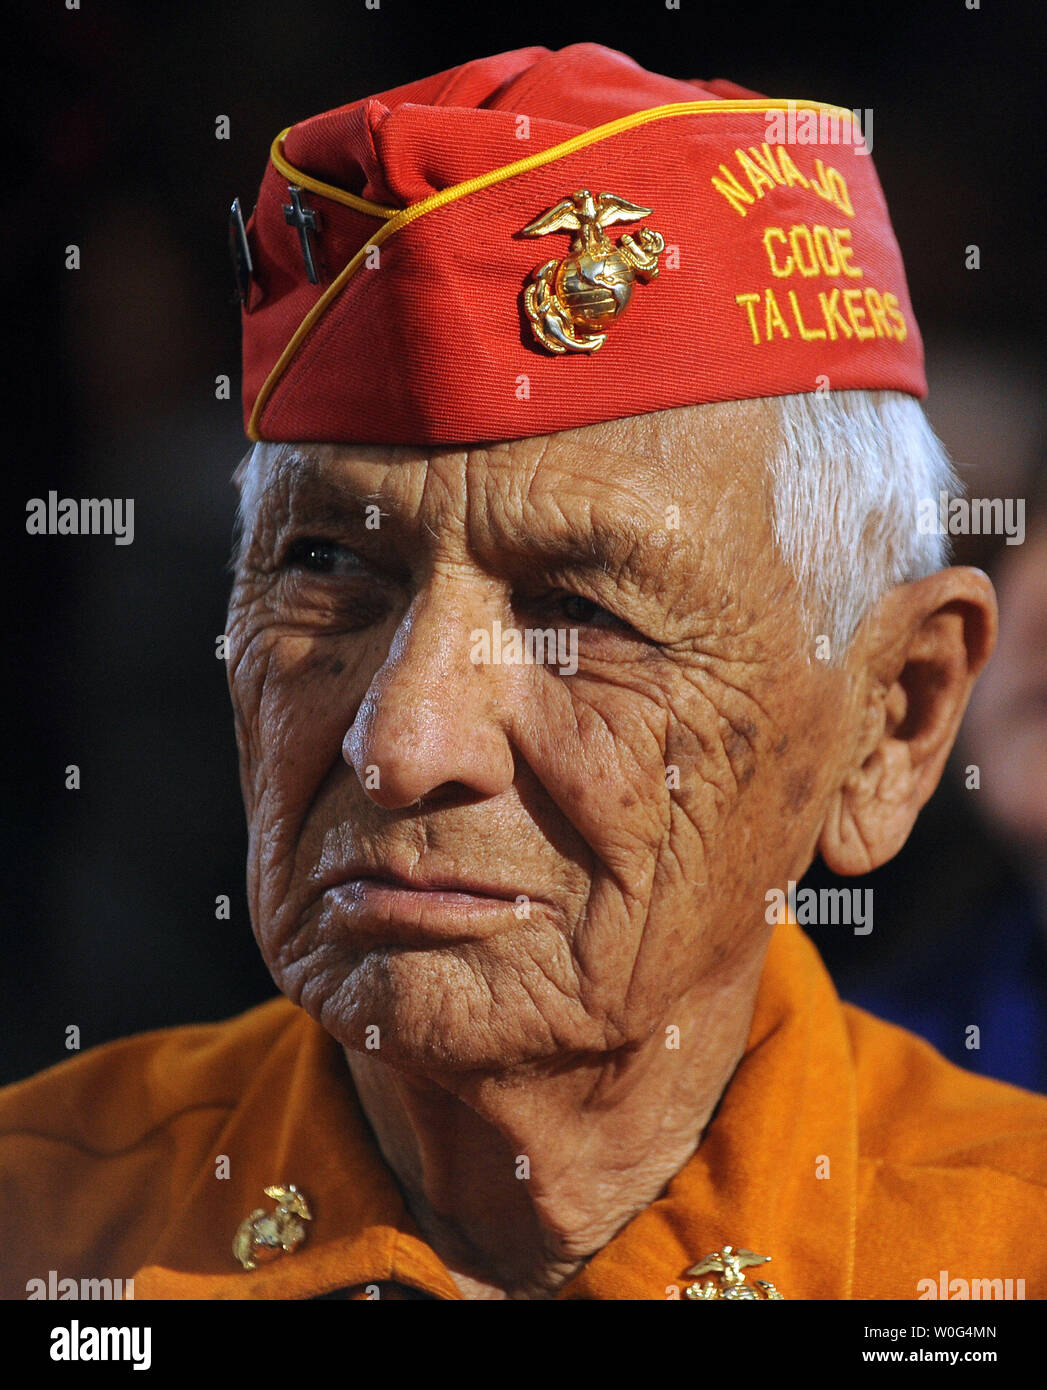 A Navajo Code Talker and former U.S. Marine looks on as U.S. President Barack Obama speaks to the White House Tribal Nations Conference at the Department of the Interior in Washington on December 16, 2010.     UPI/Roger L. Wollenberg Stock Photo